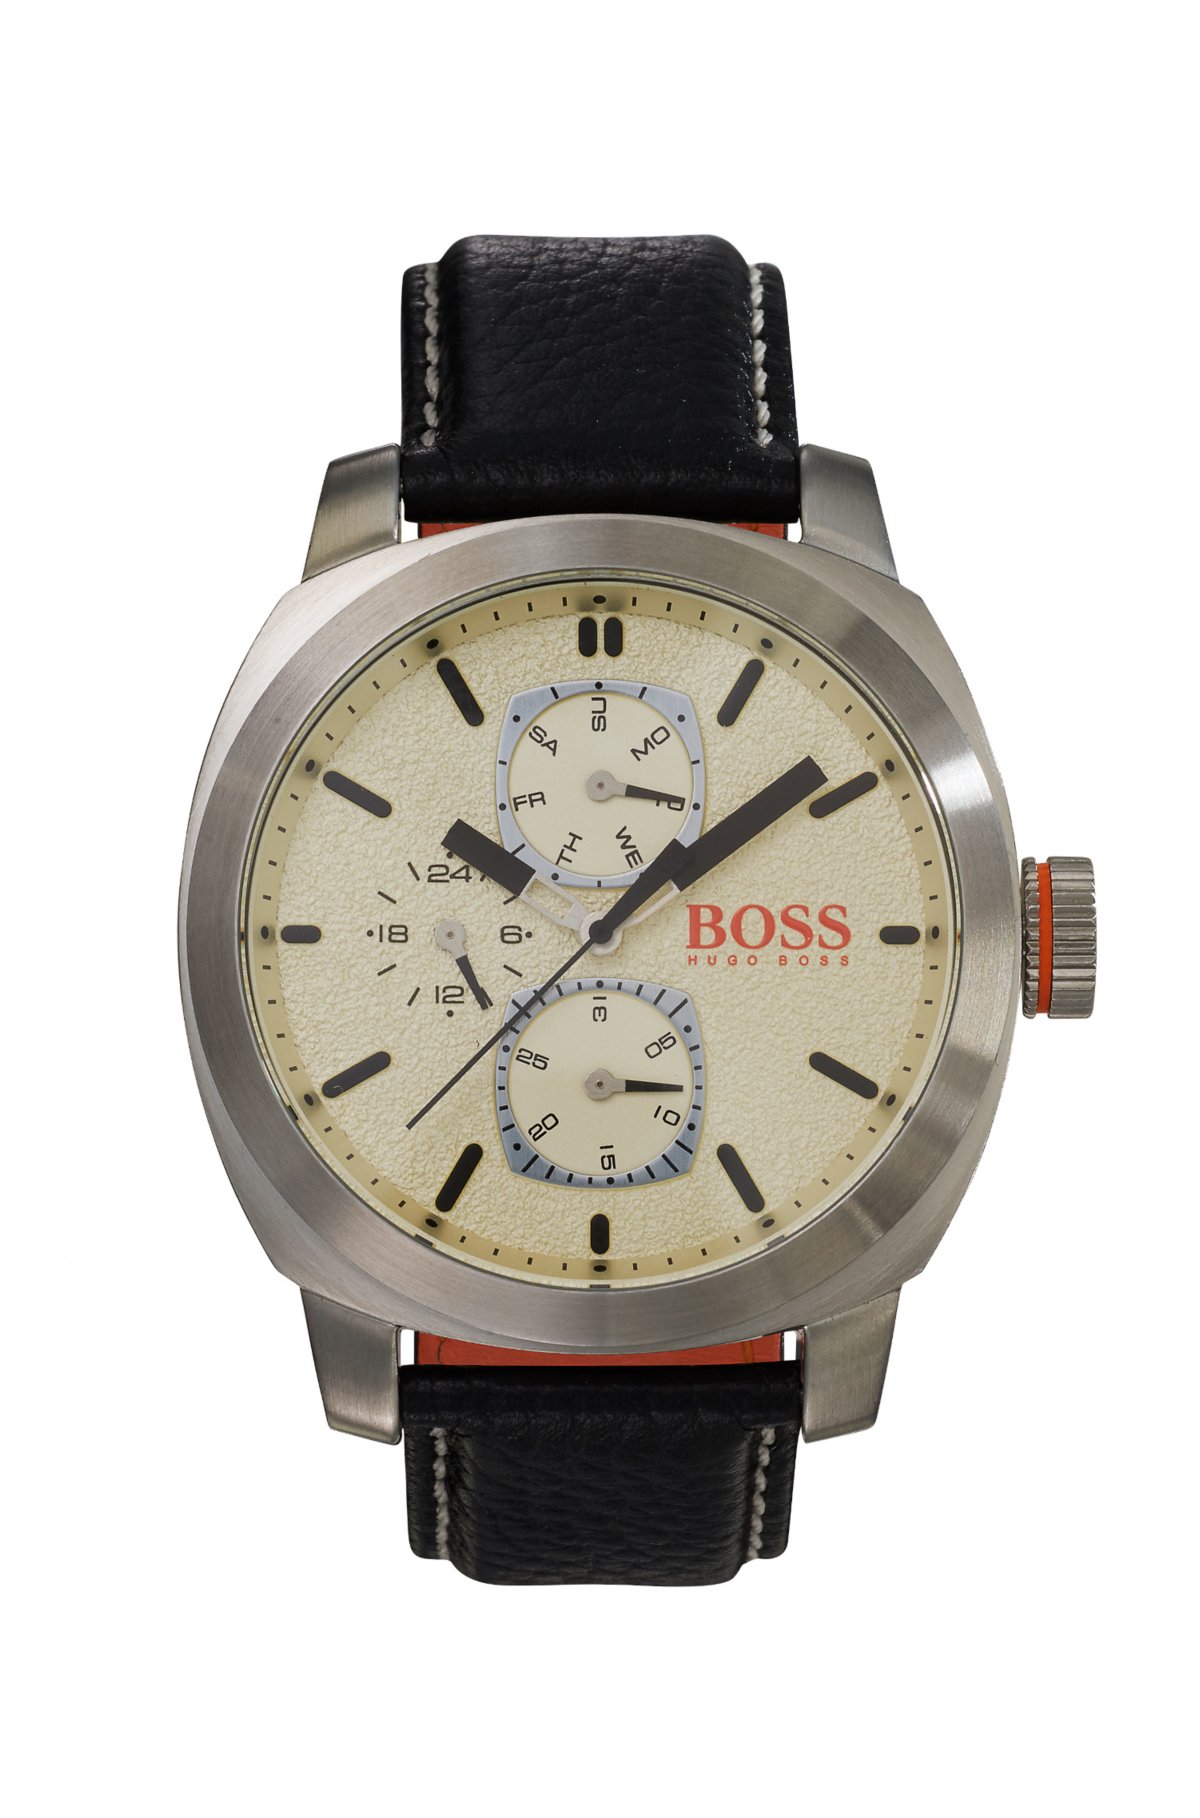 BOSS - Cape Town Casual, Strap 1550026 Leather | Watch